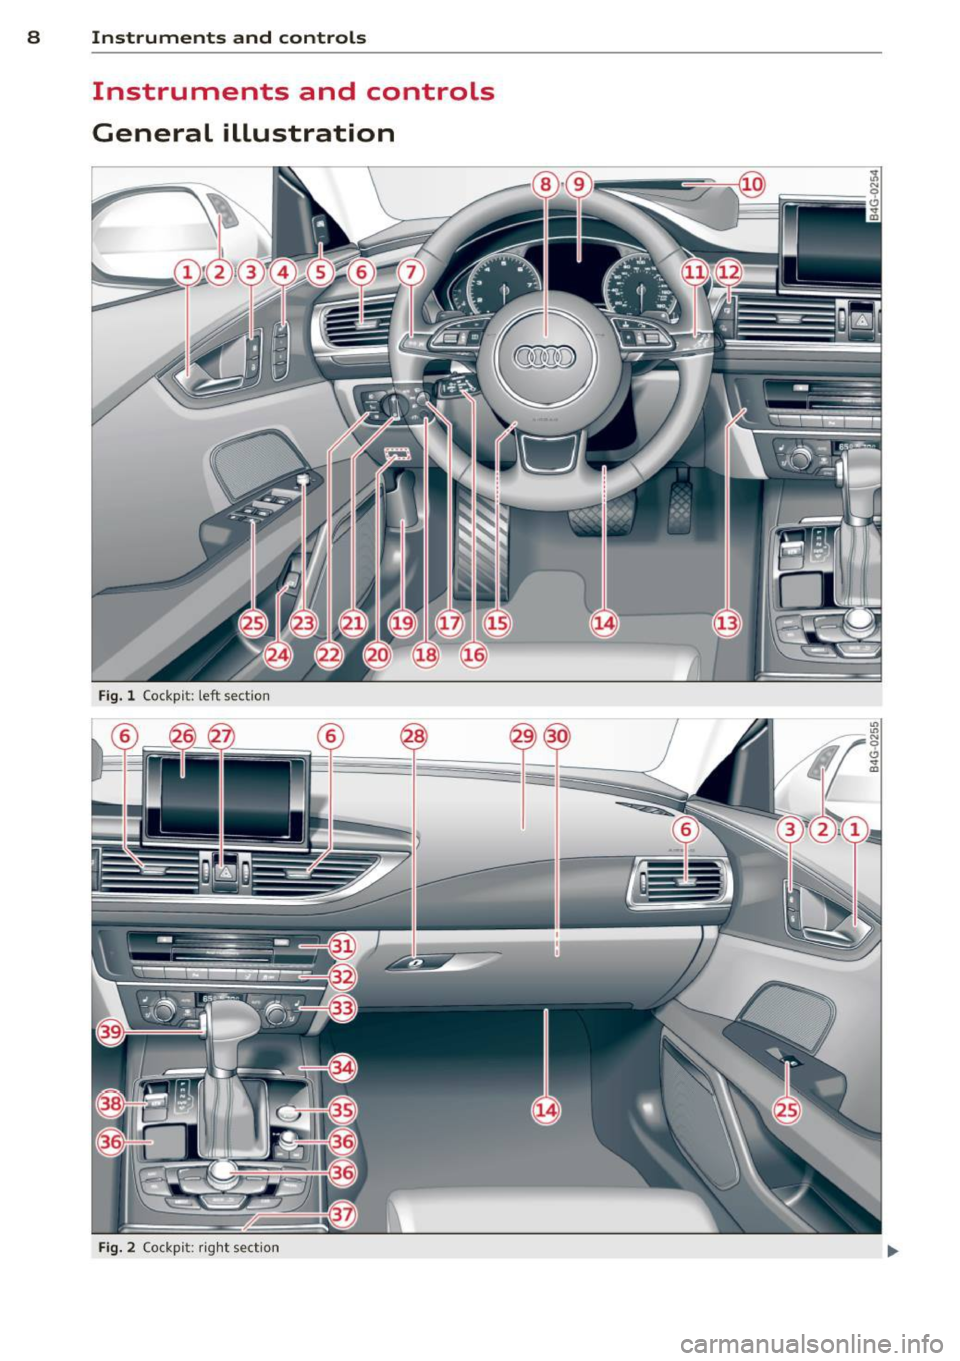 AUDI A7 2015  Owners Manual 8  Instruments and controls 
Instruments  and  controls 
General  illustration 
Fig. l Cockp it:  left  sect io n 
Fig. 2 Co ck pi t: ri ght  sect io n  